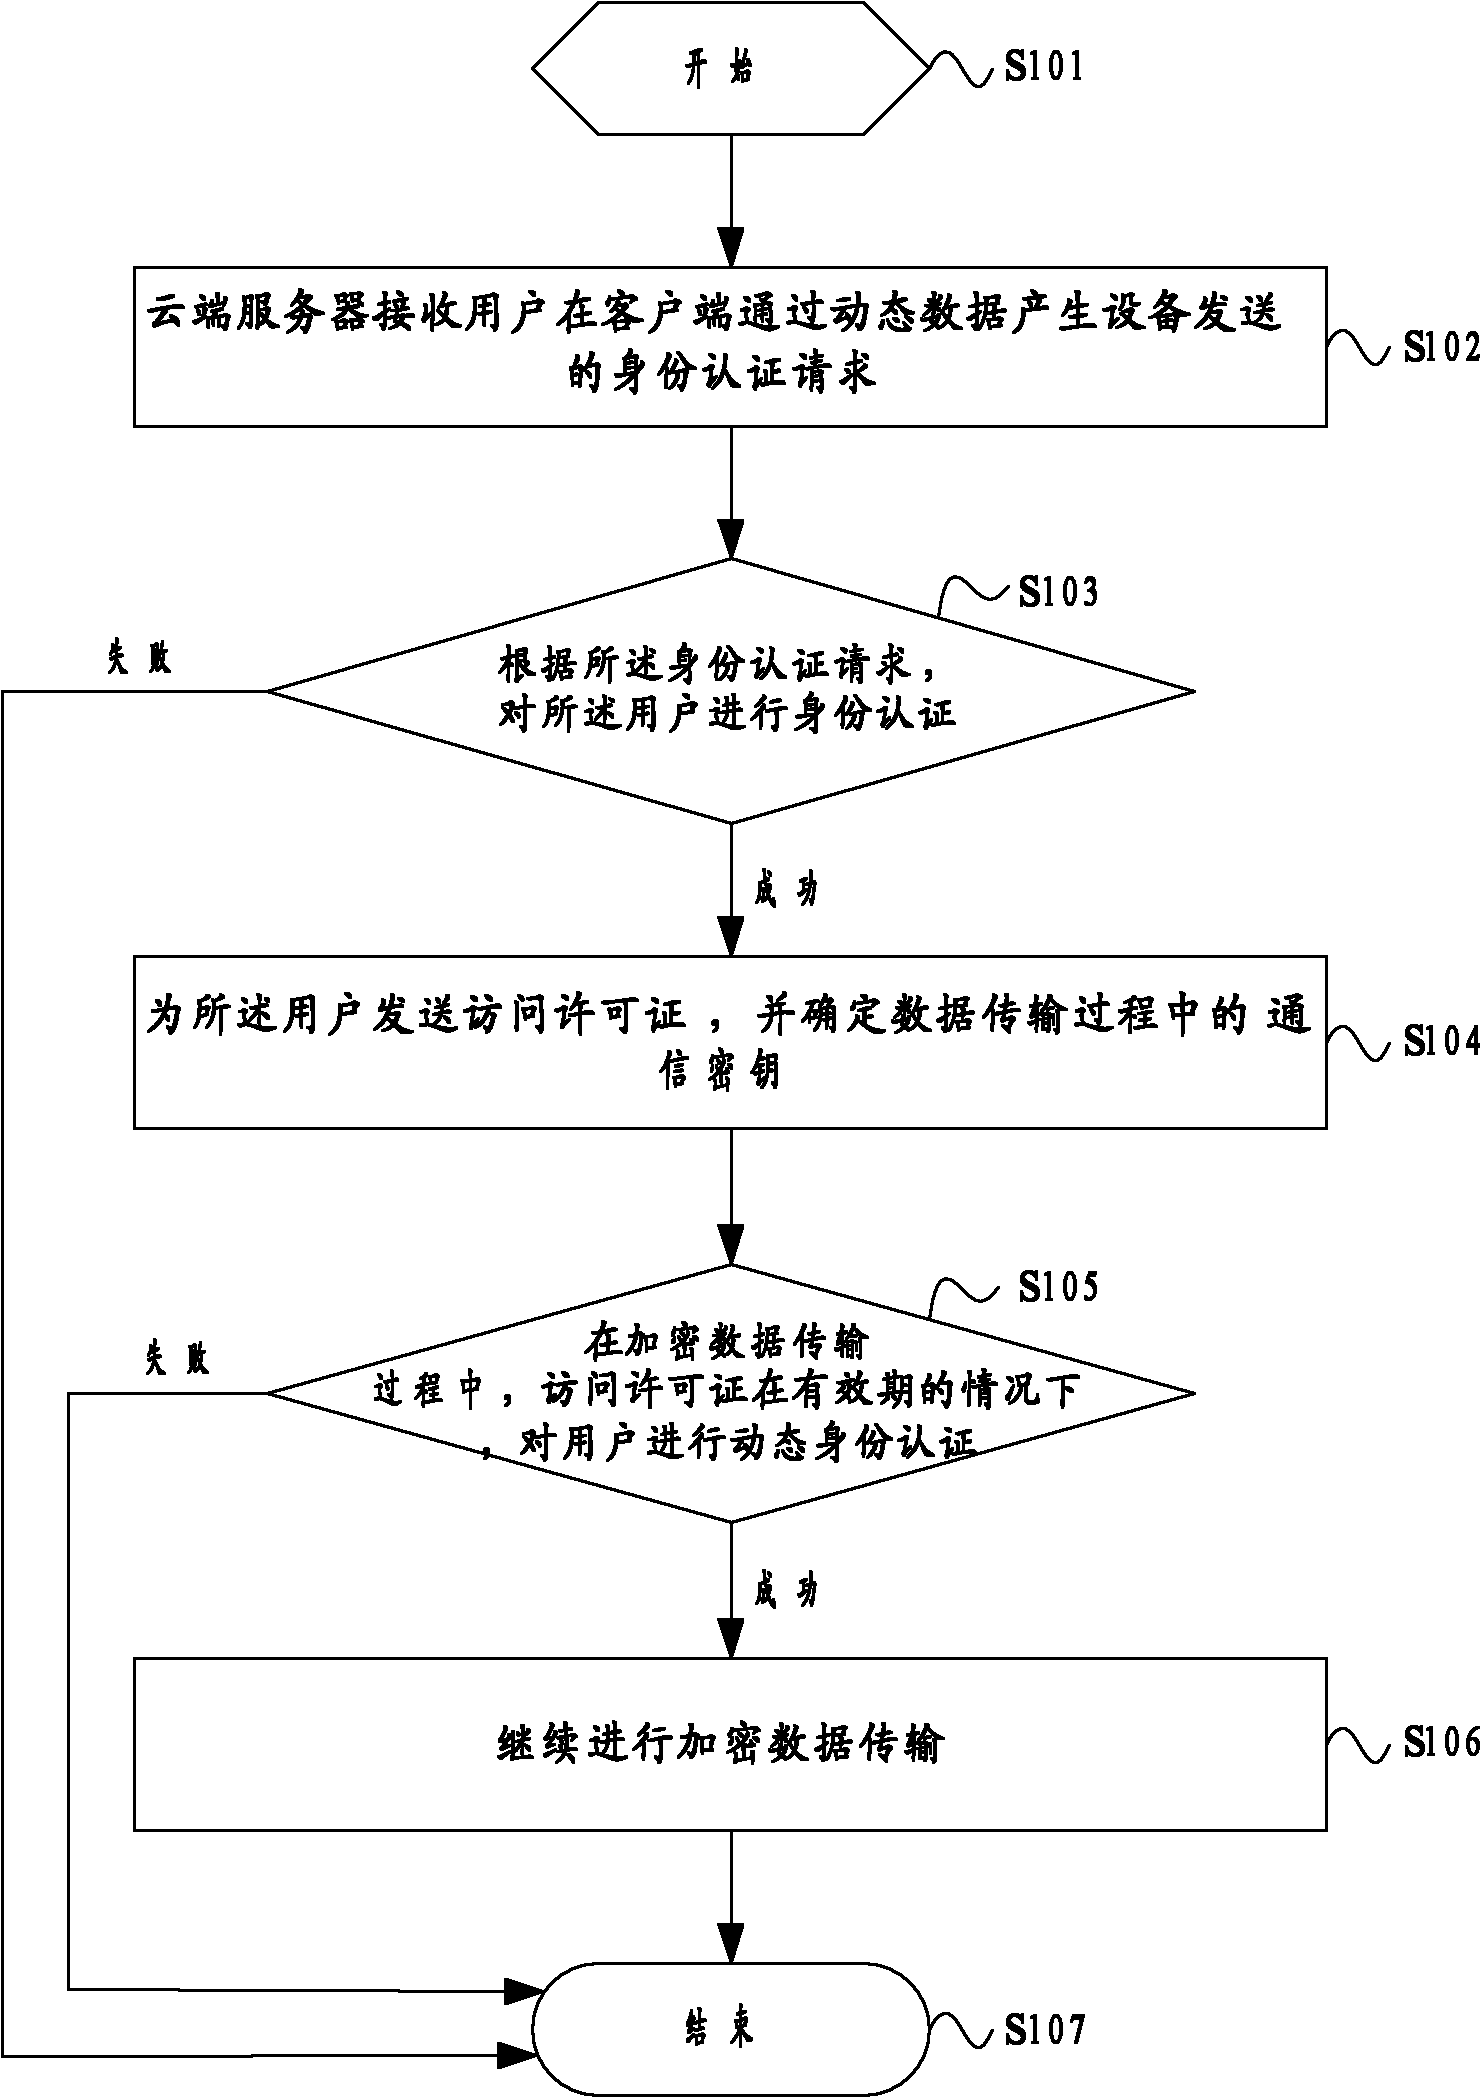 Data transmitting method and system applied to cloud system